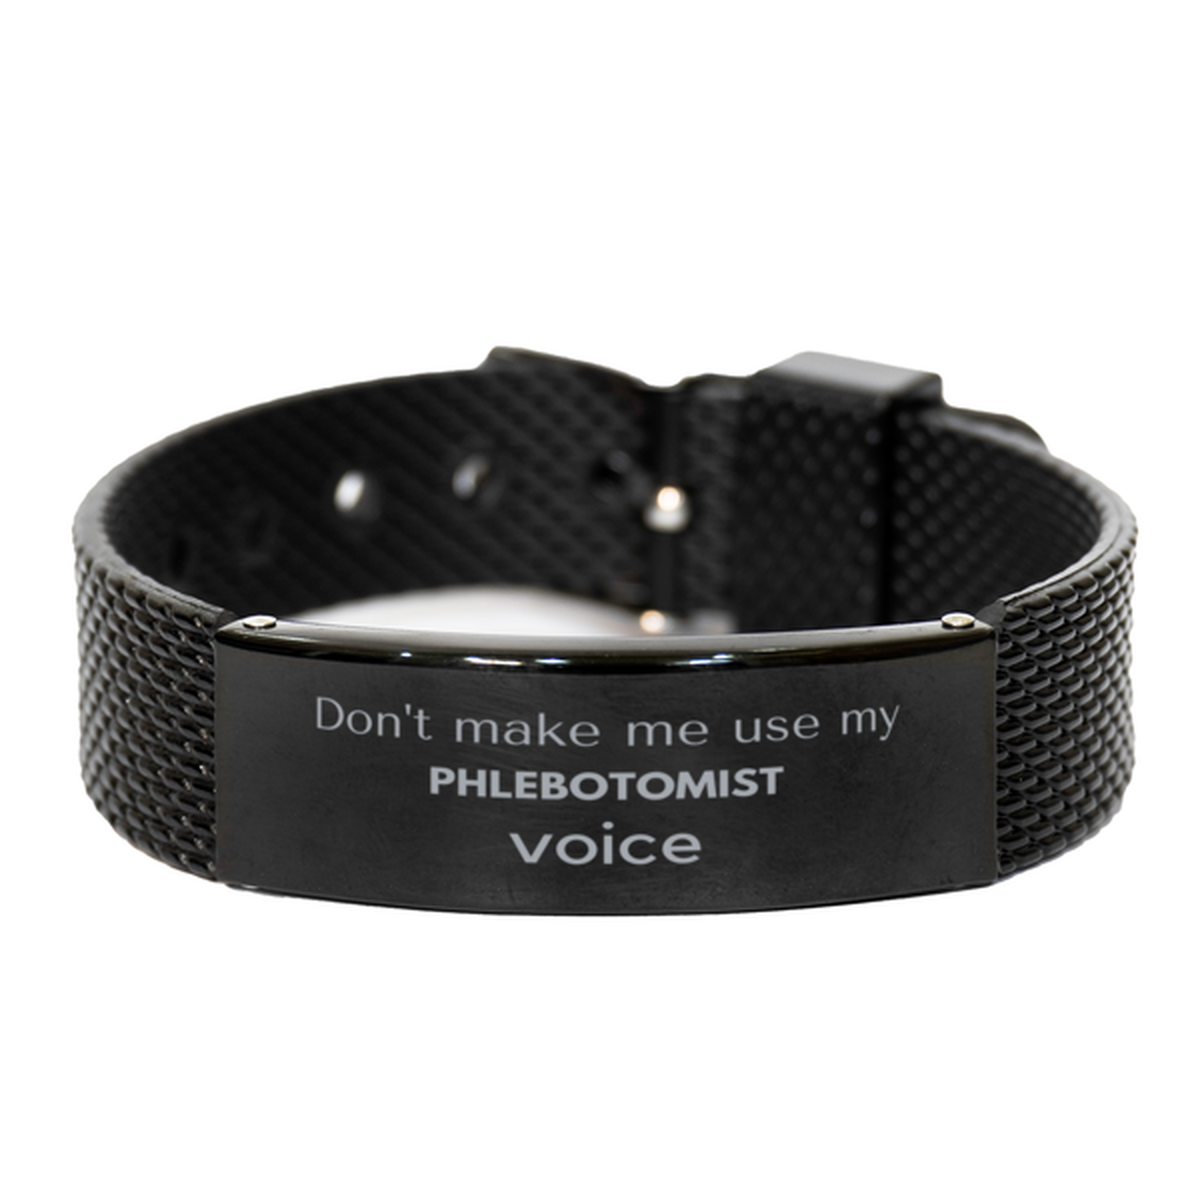 Don't make me use my Phlebotomist voice, Sarcasm Phlebotomist Gifts, Christmas Phlebotomist Black Shark Mesh Bracelet Birthday Unique Gifts For Phlebotomist Coworkers, Men, Women, Colleague, Friends